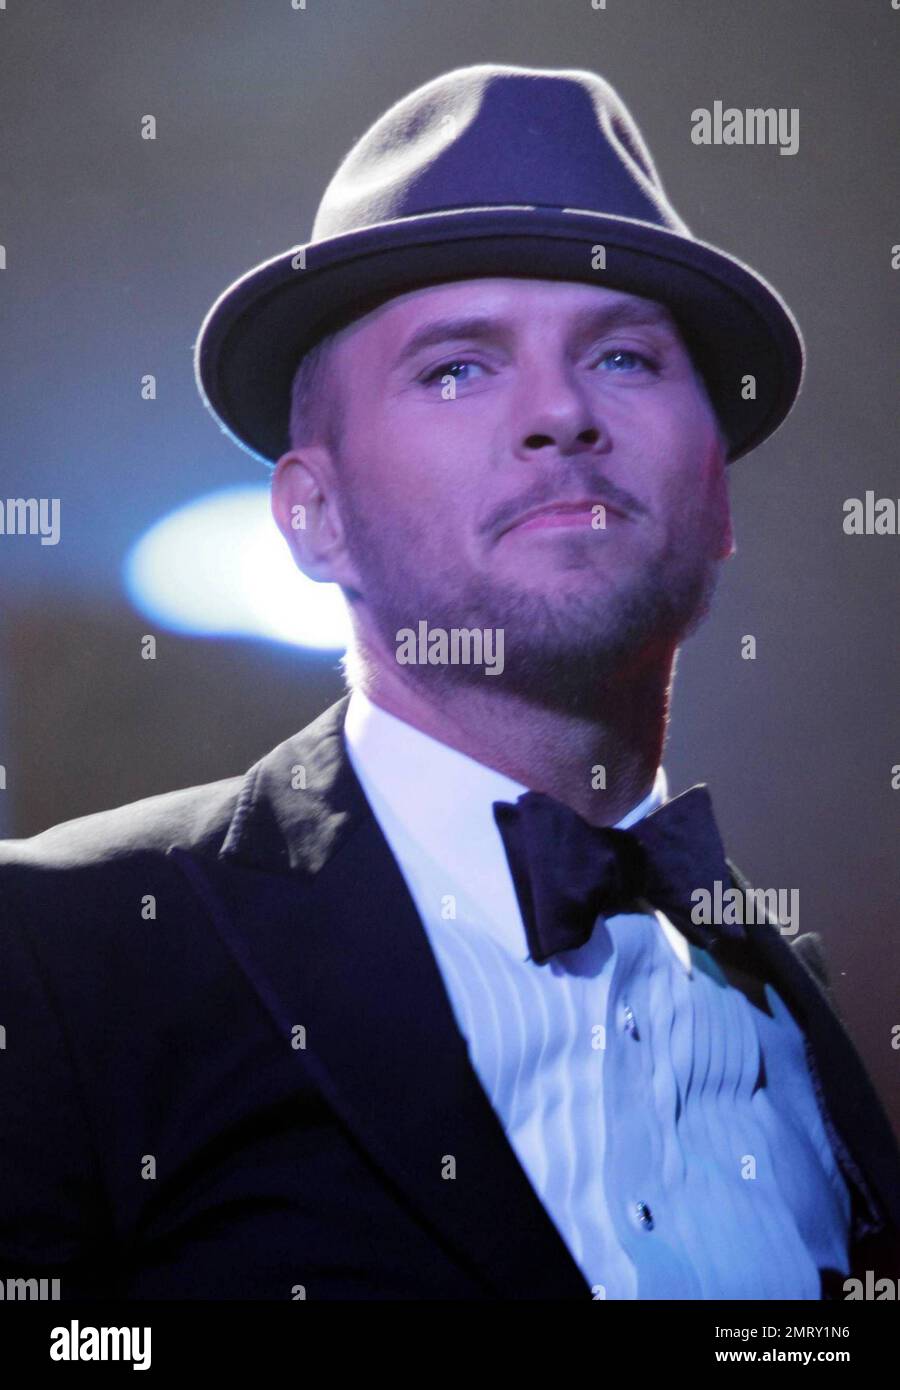 EXCLUSIVE!! Matt Goss at his Caesars Palace Las Vegas show 'Matt Goss Live' which he has brought to the UK for the first time, performing at Royal Albert Hall. London, UK. 10/19/10. Stock Photo